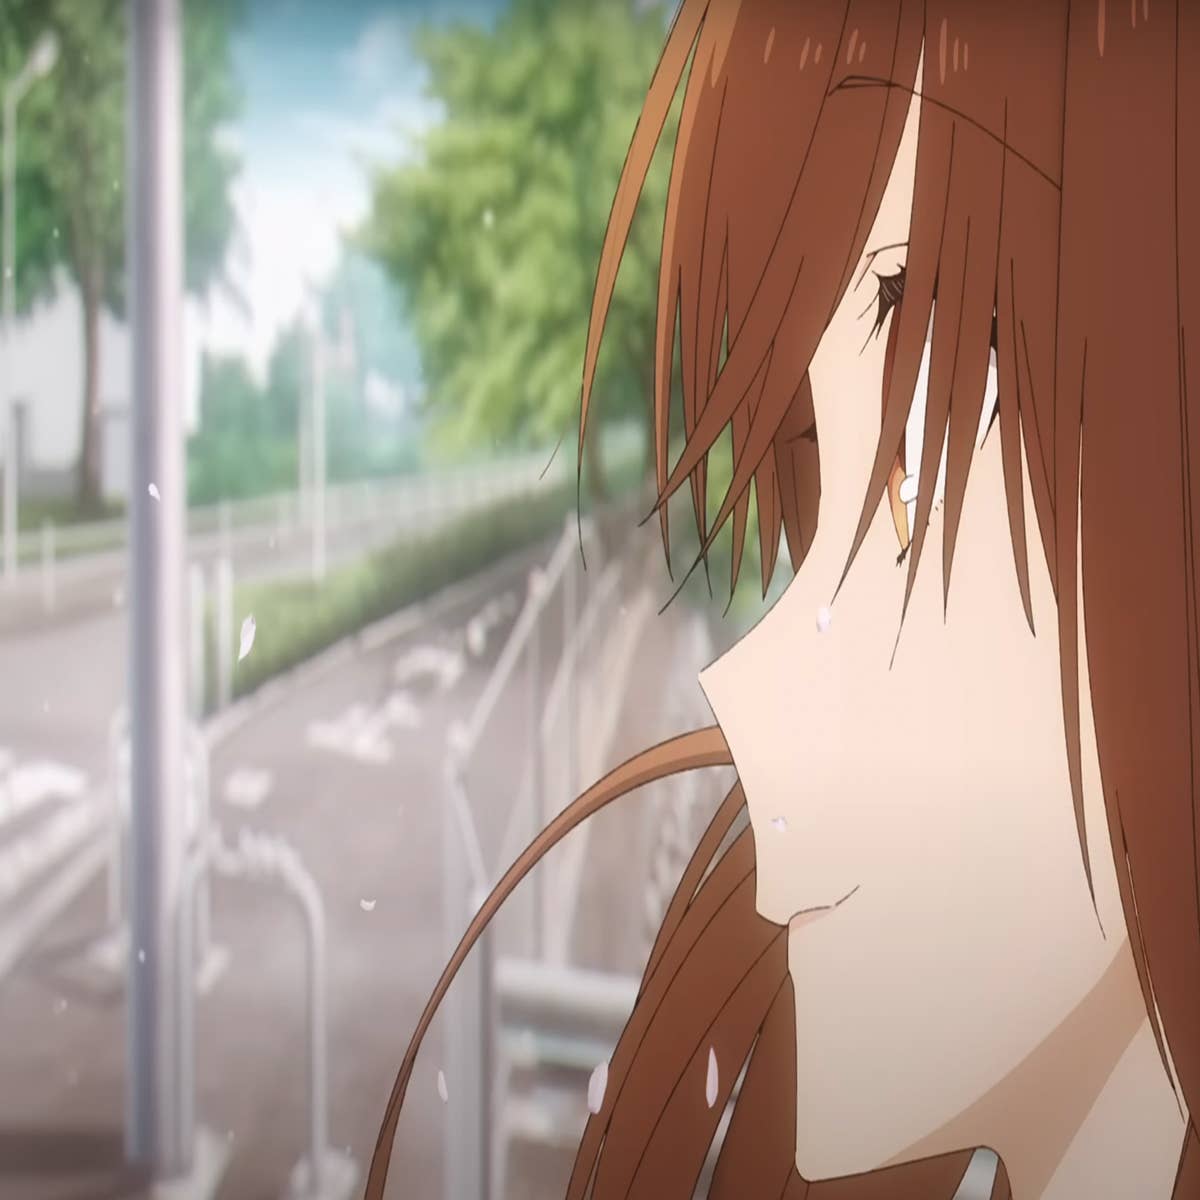 HORIMIYA SEASON 2: Update On Release Date & Every Other Detail